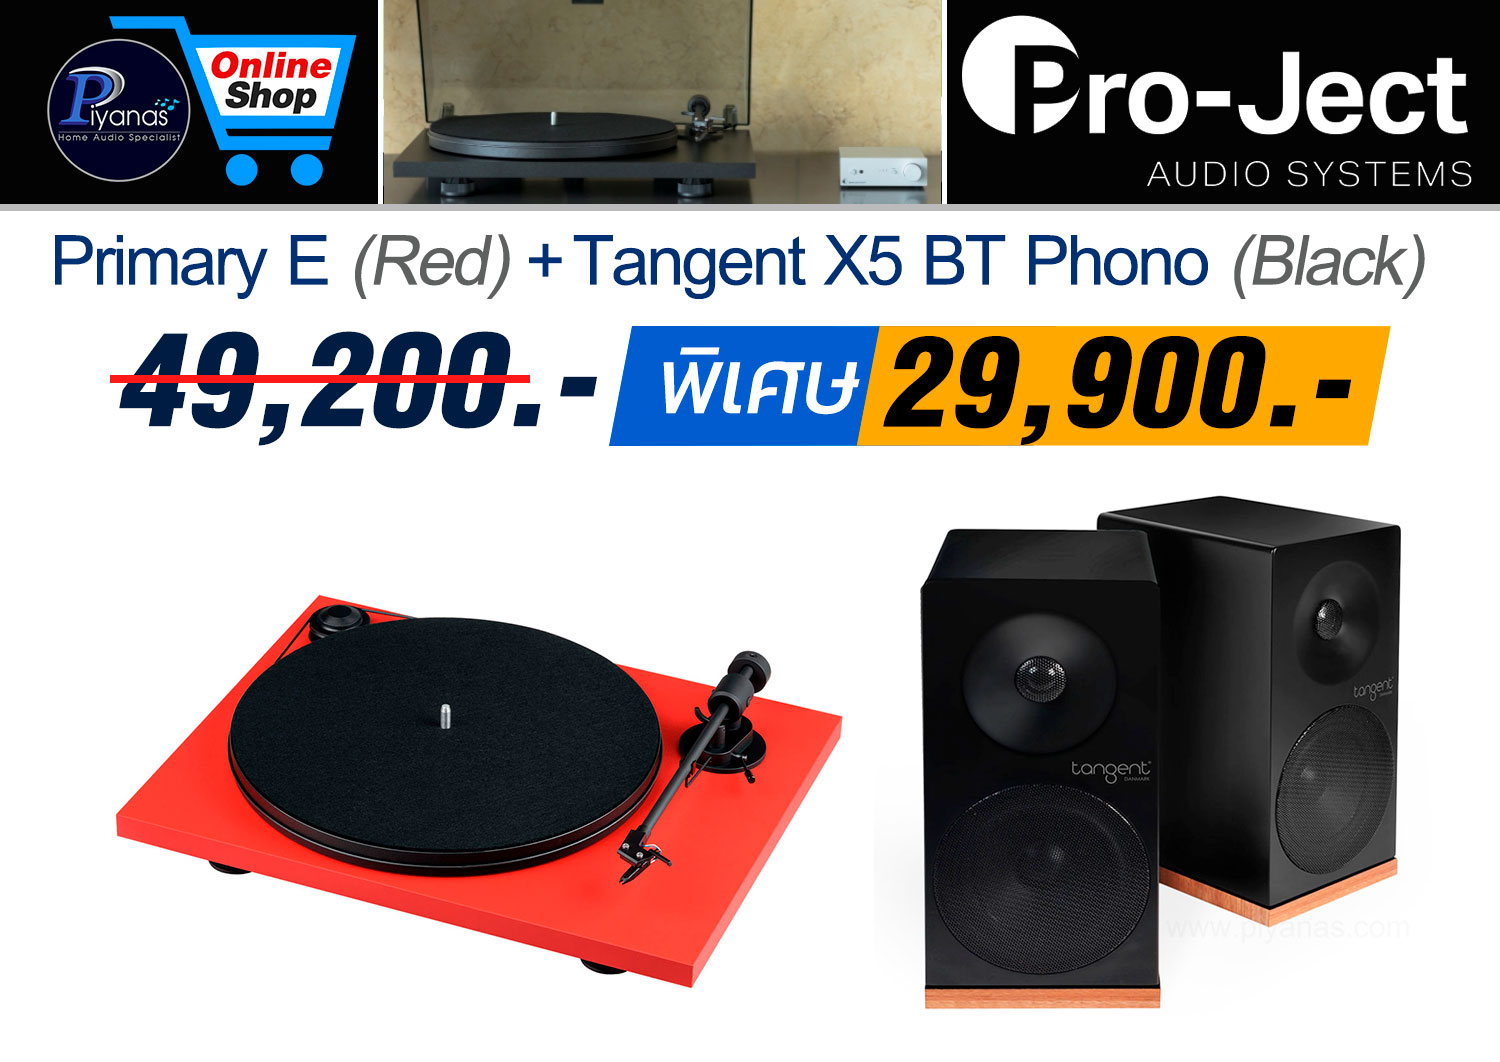 Primary E (Red) + Tangent X5 BT Phono (Black) 